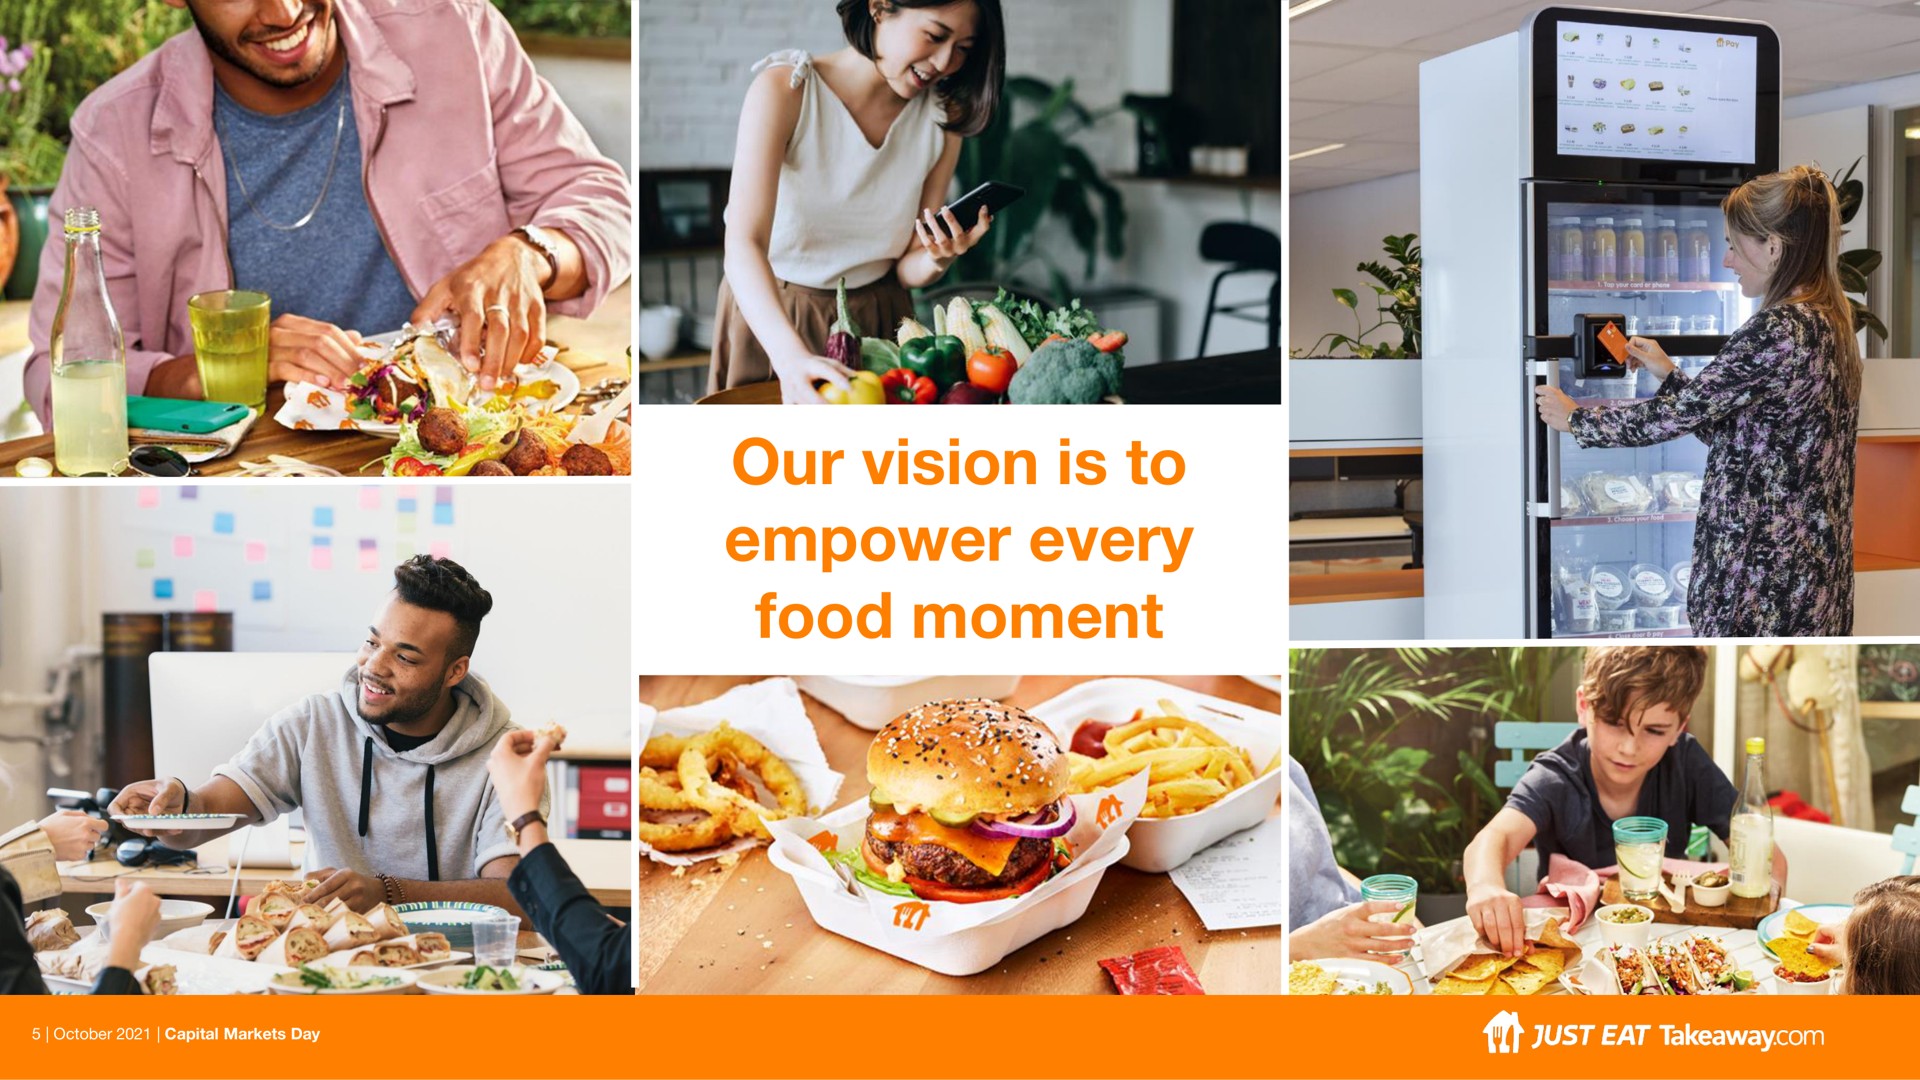 our vision is to empower every food moment | Just Eat Takeaway.com